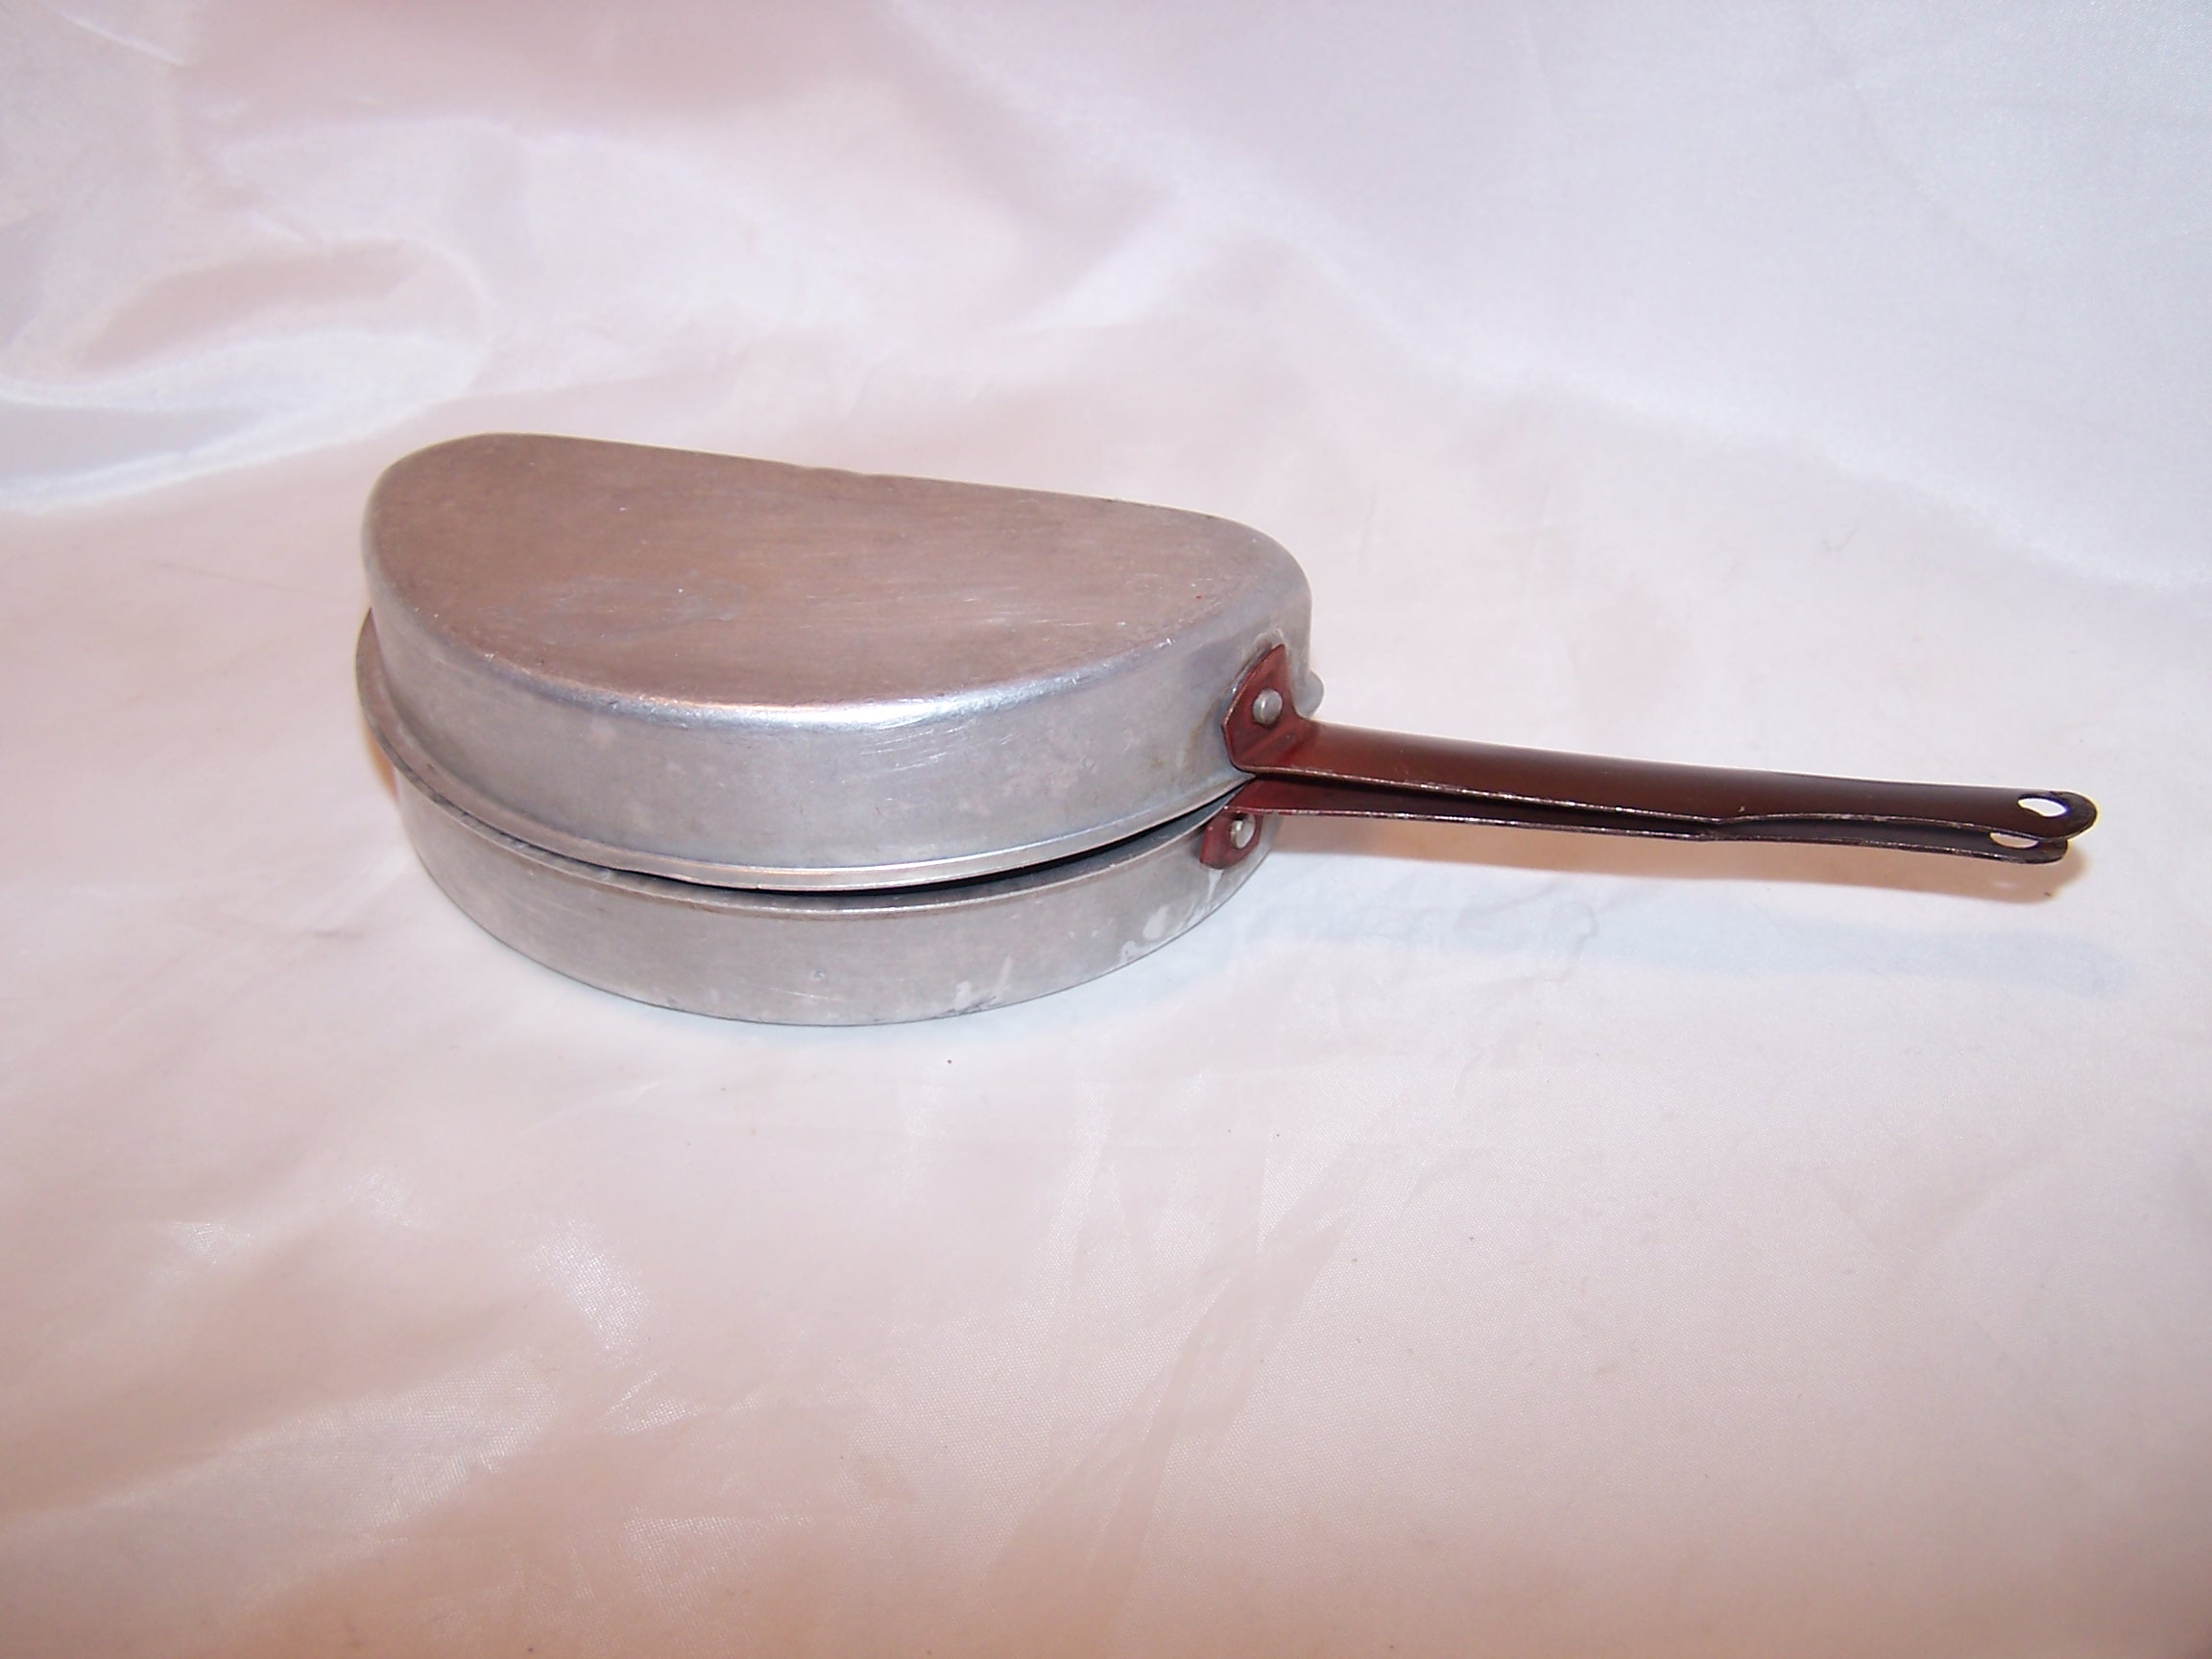 Toy Omelete Pan, Aluminum, Vintage Childs Toy